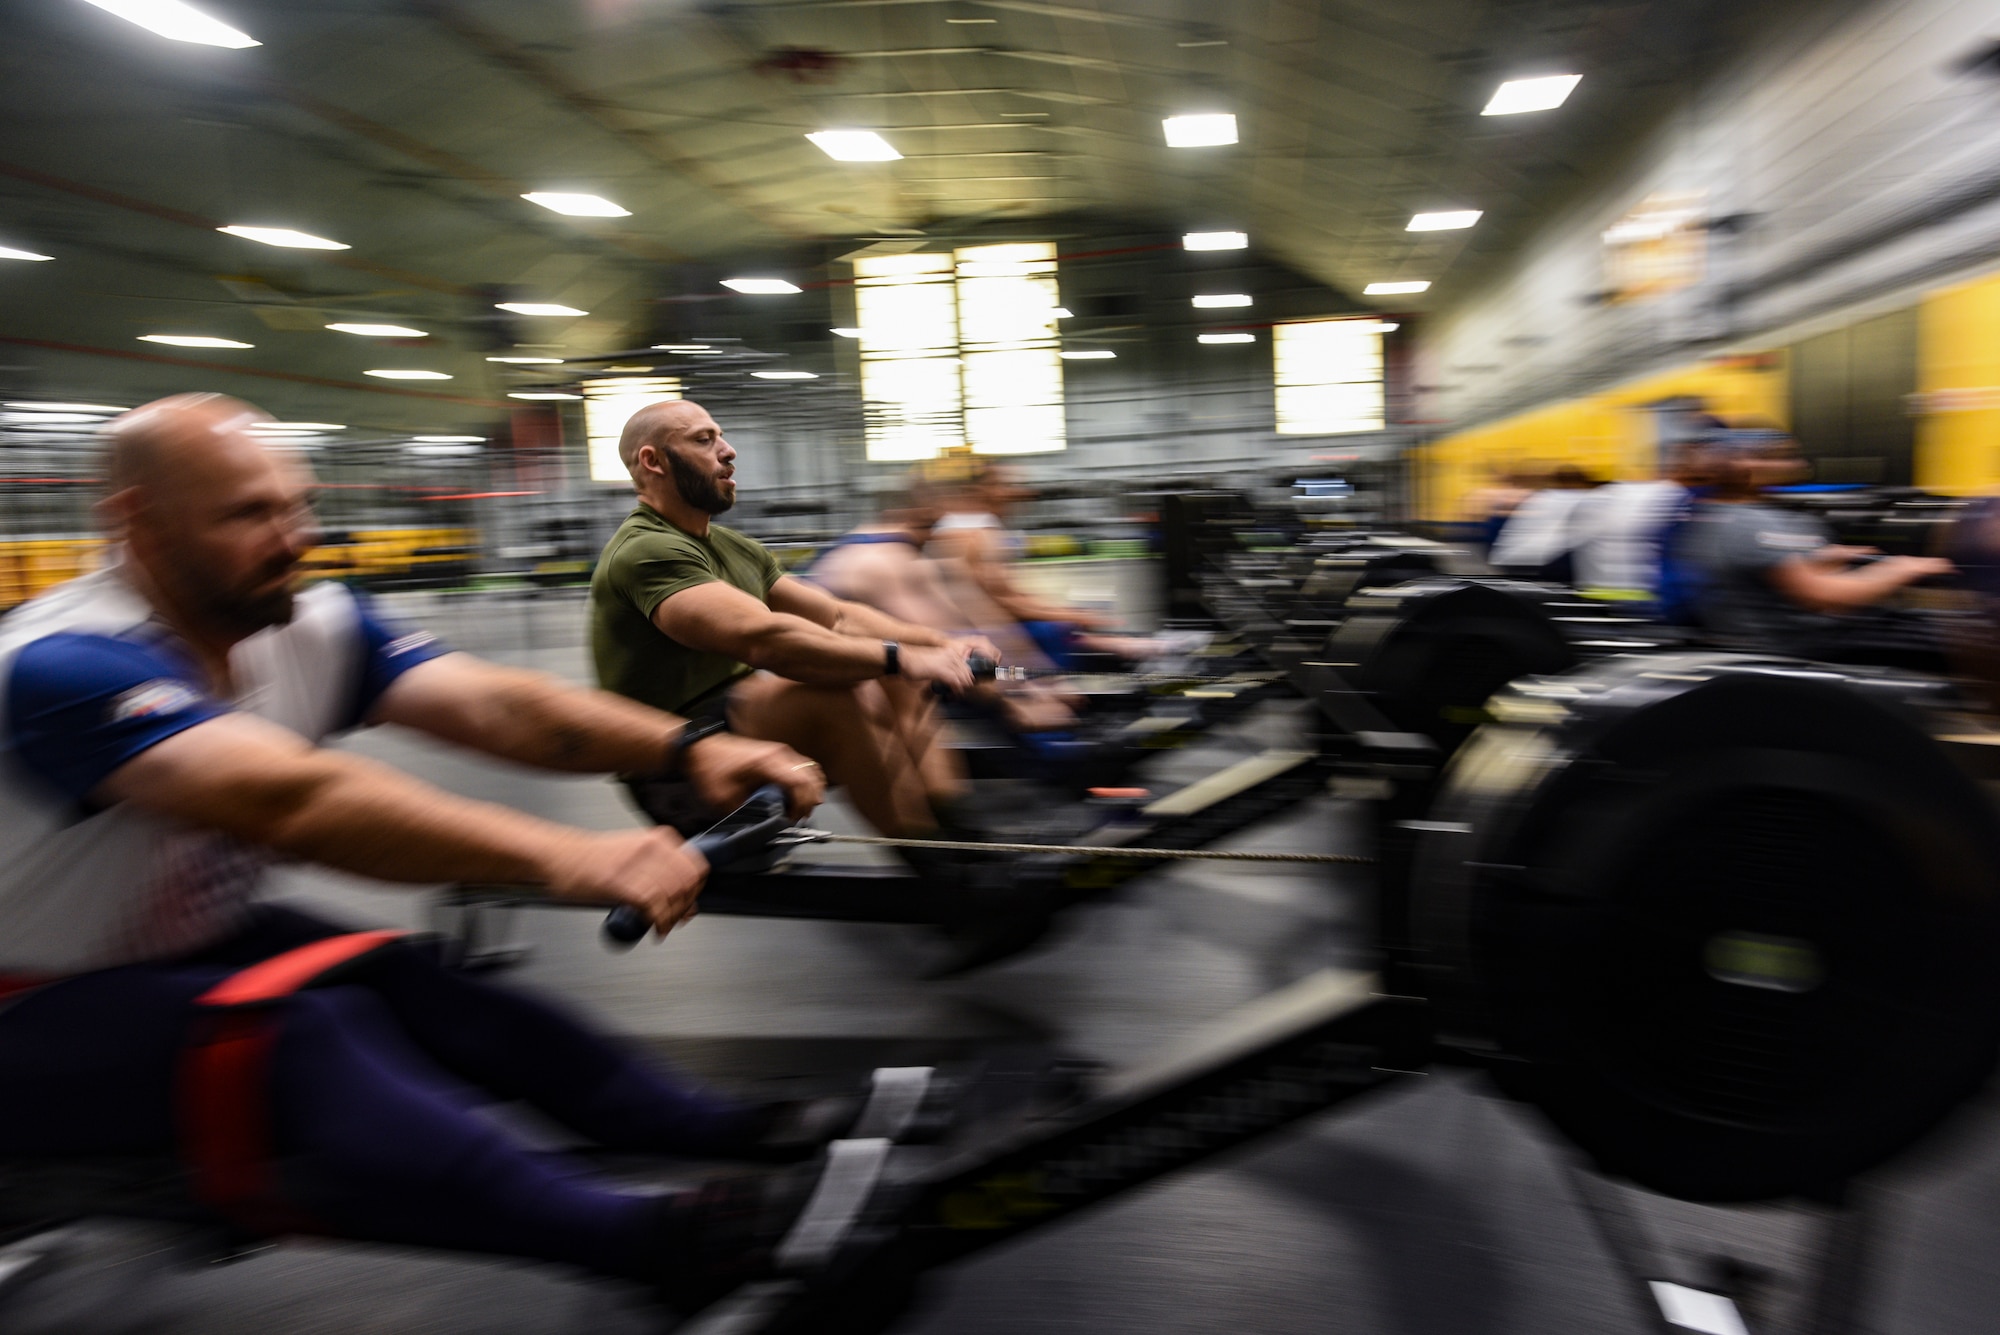 Montana Air National Guard Staff Sgt. Matt Cable, a security forces defender and member of the Air Force Wounded Warrior Program, practices rowing in preparation for the 2022 Invictus Games. Cable won medals in all seven events he competed in at the games in The Hague, Netherlands, April 14-22.